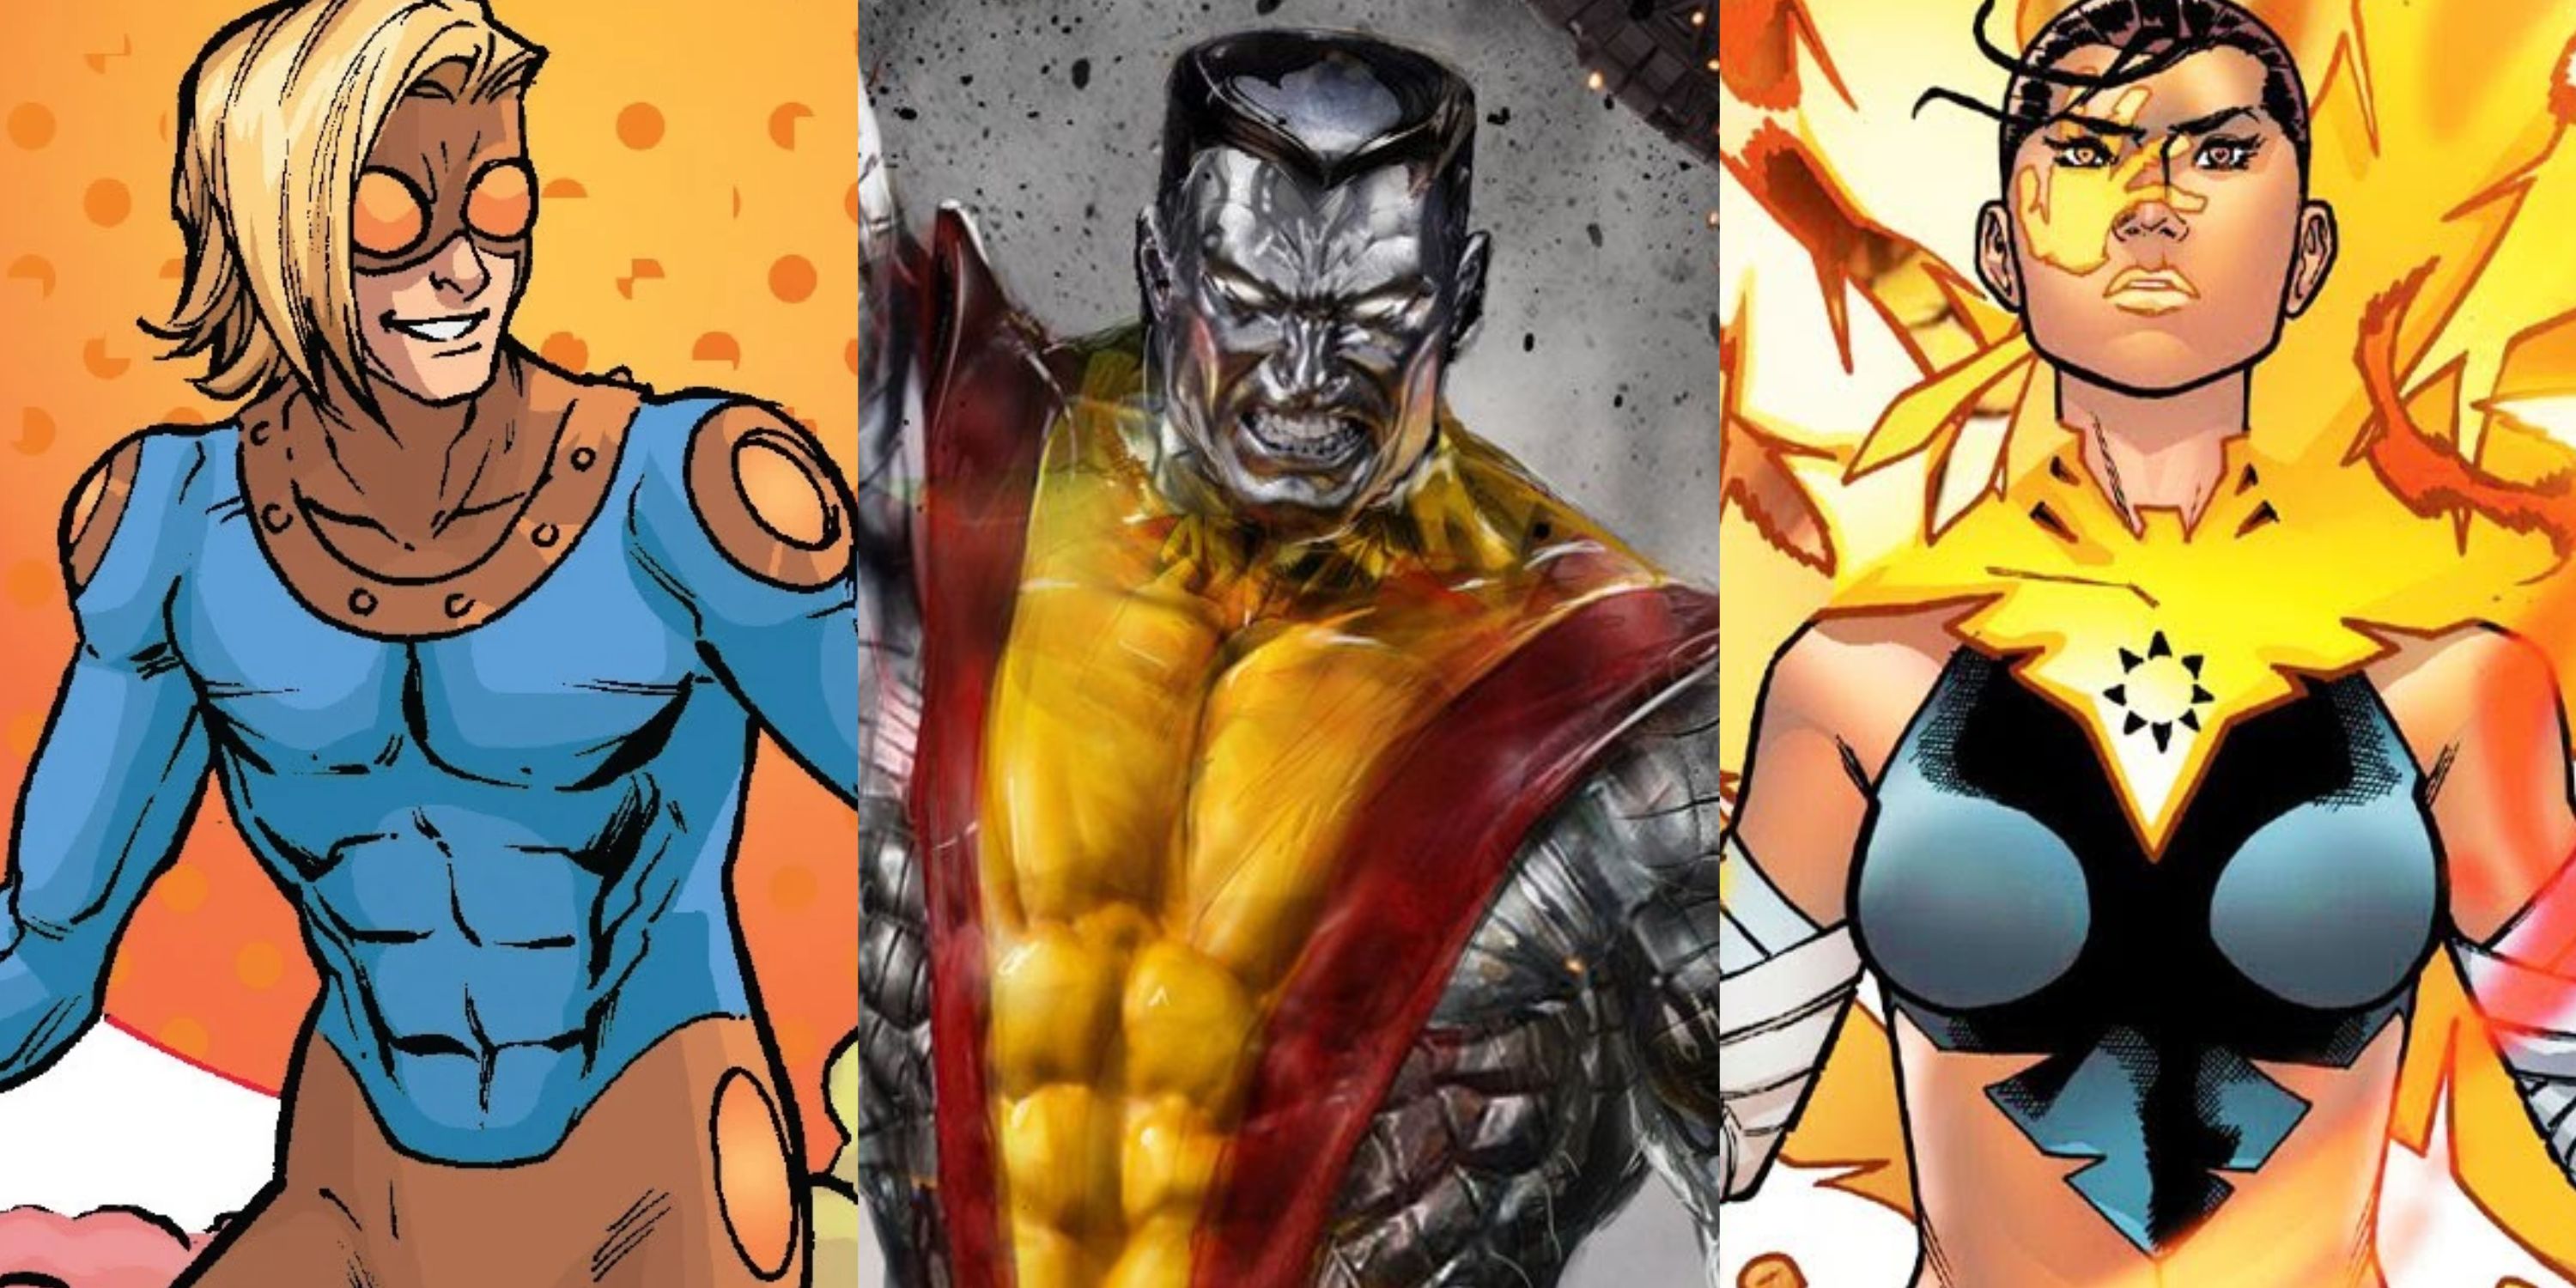 Split image of Speedball, Colossus and Echo from Marvel Comics